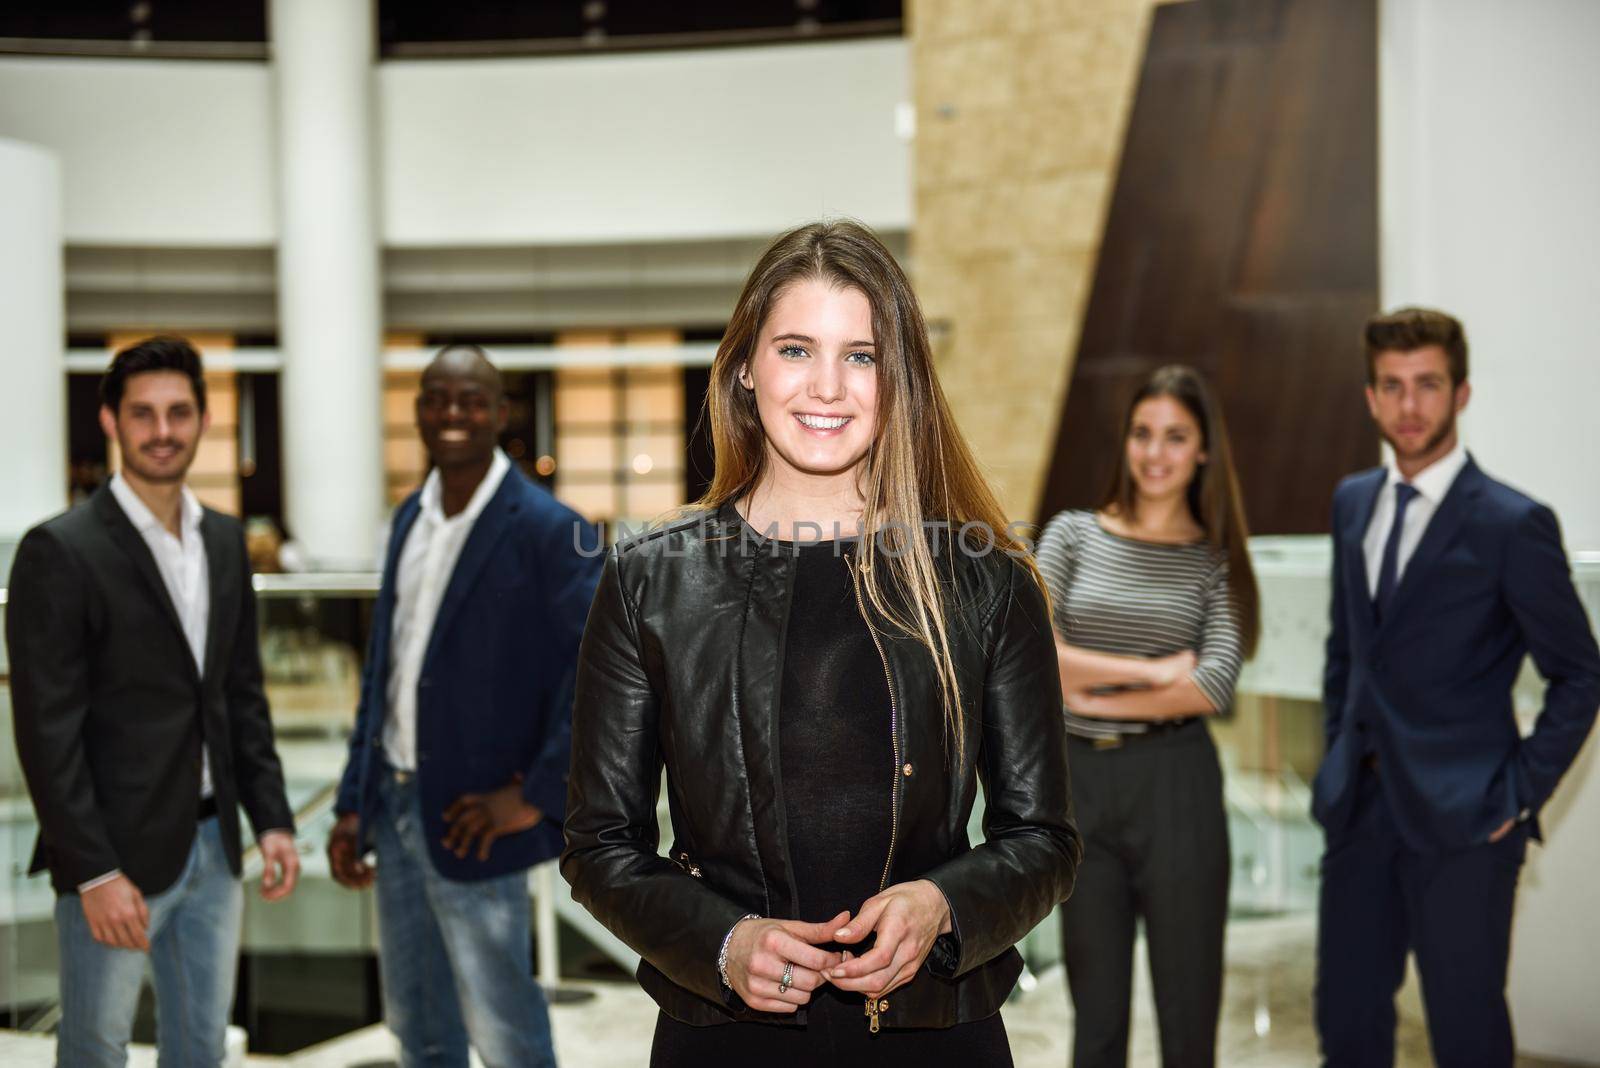 Blonde businesswoman leader looking at camera in office building. Group of multi-ethnic people in the background